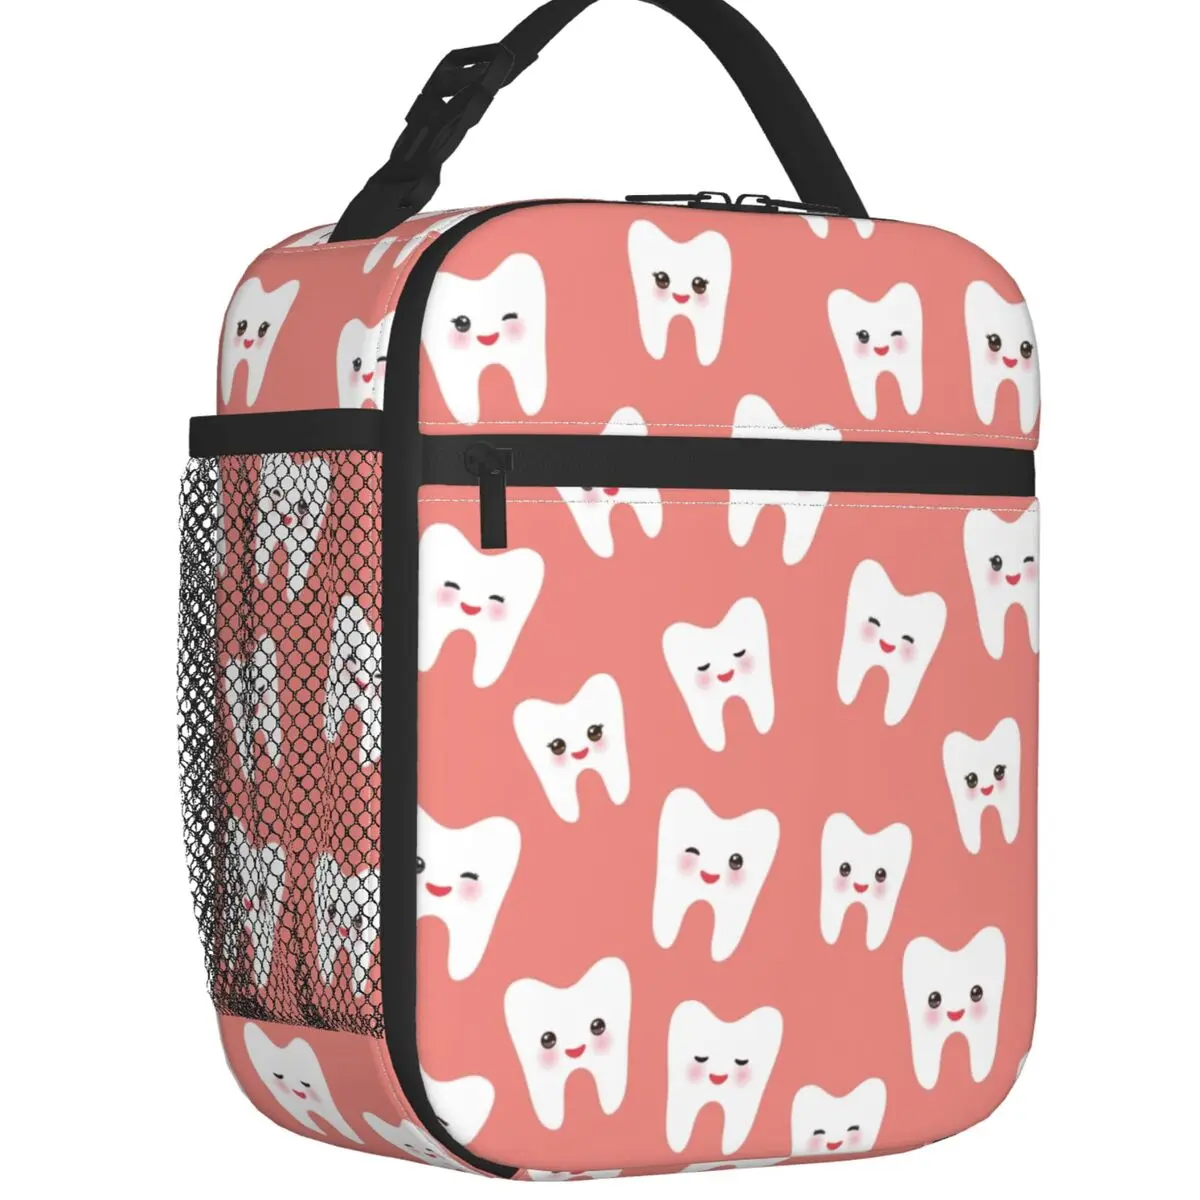 

White Teeth With Funny Faces Insulated Lunch Bag for Women Resuable Dentist Tooth Thermal Cooler Lunch Box Office Work School